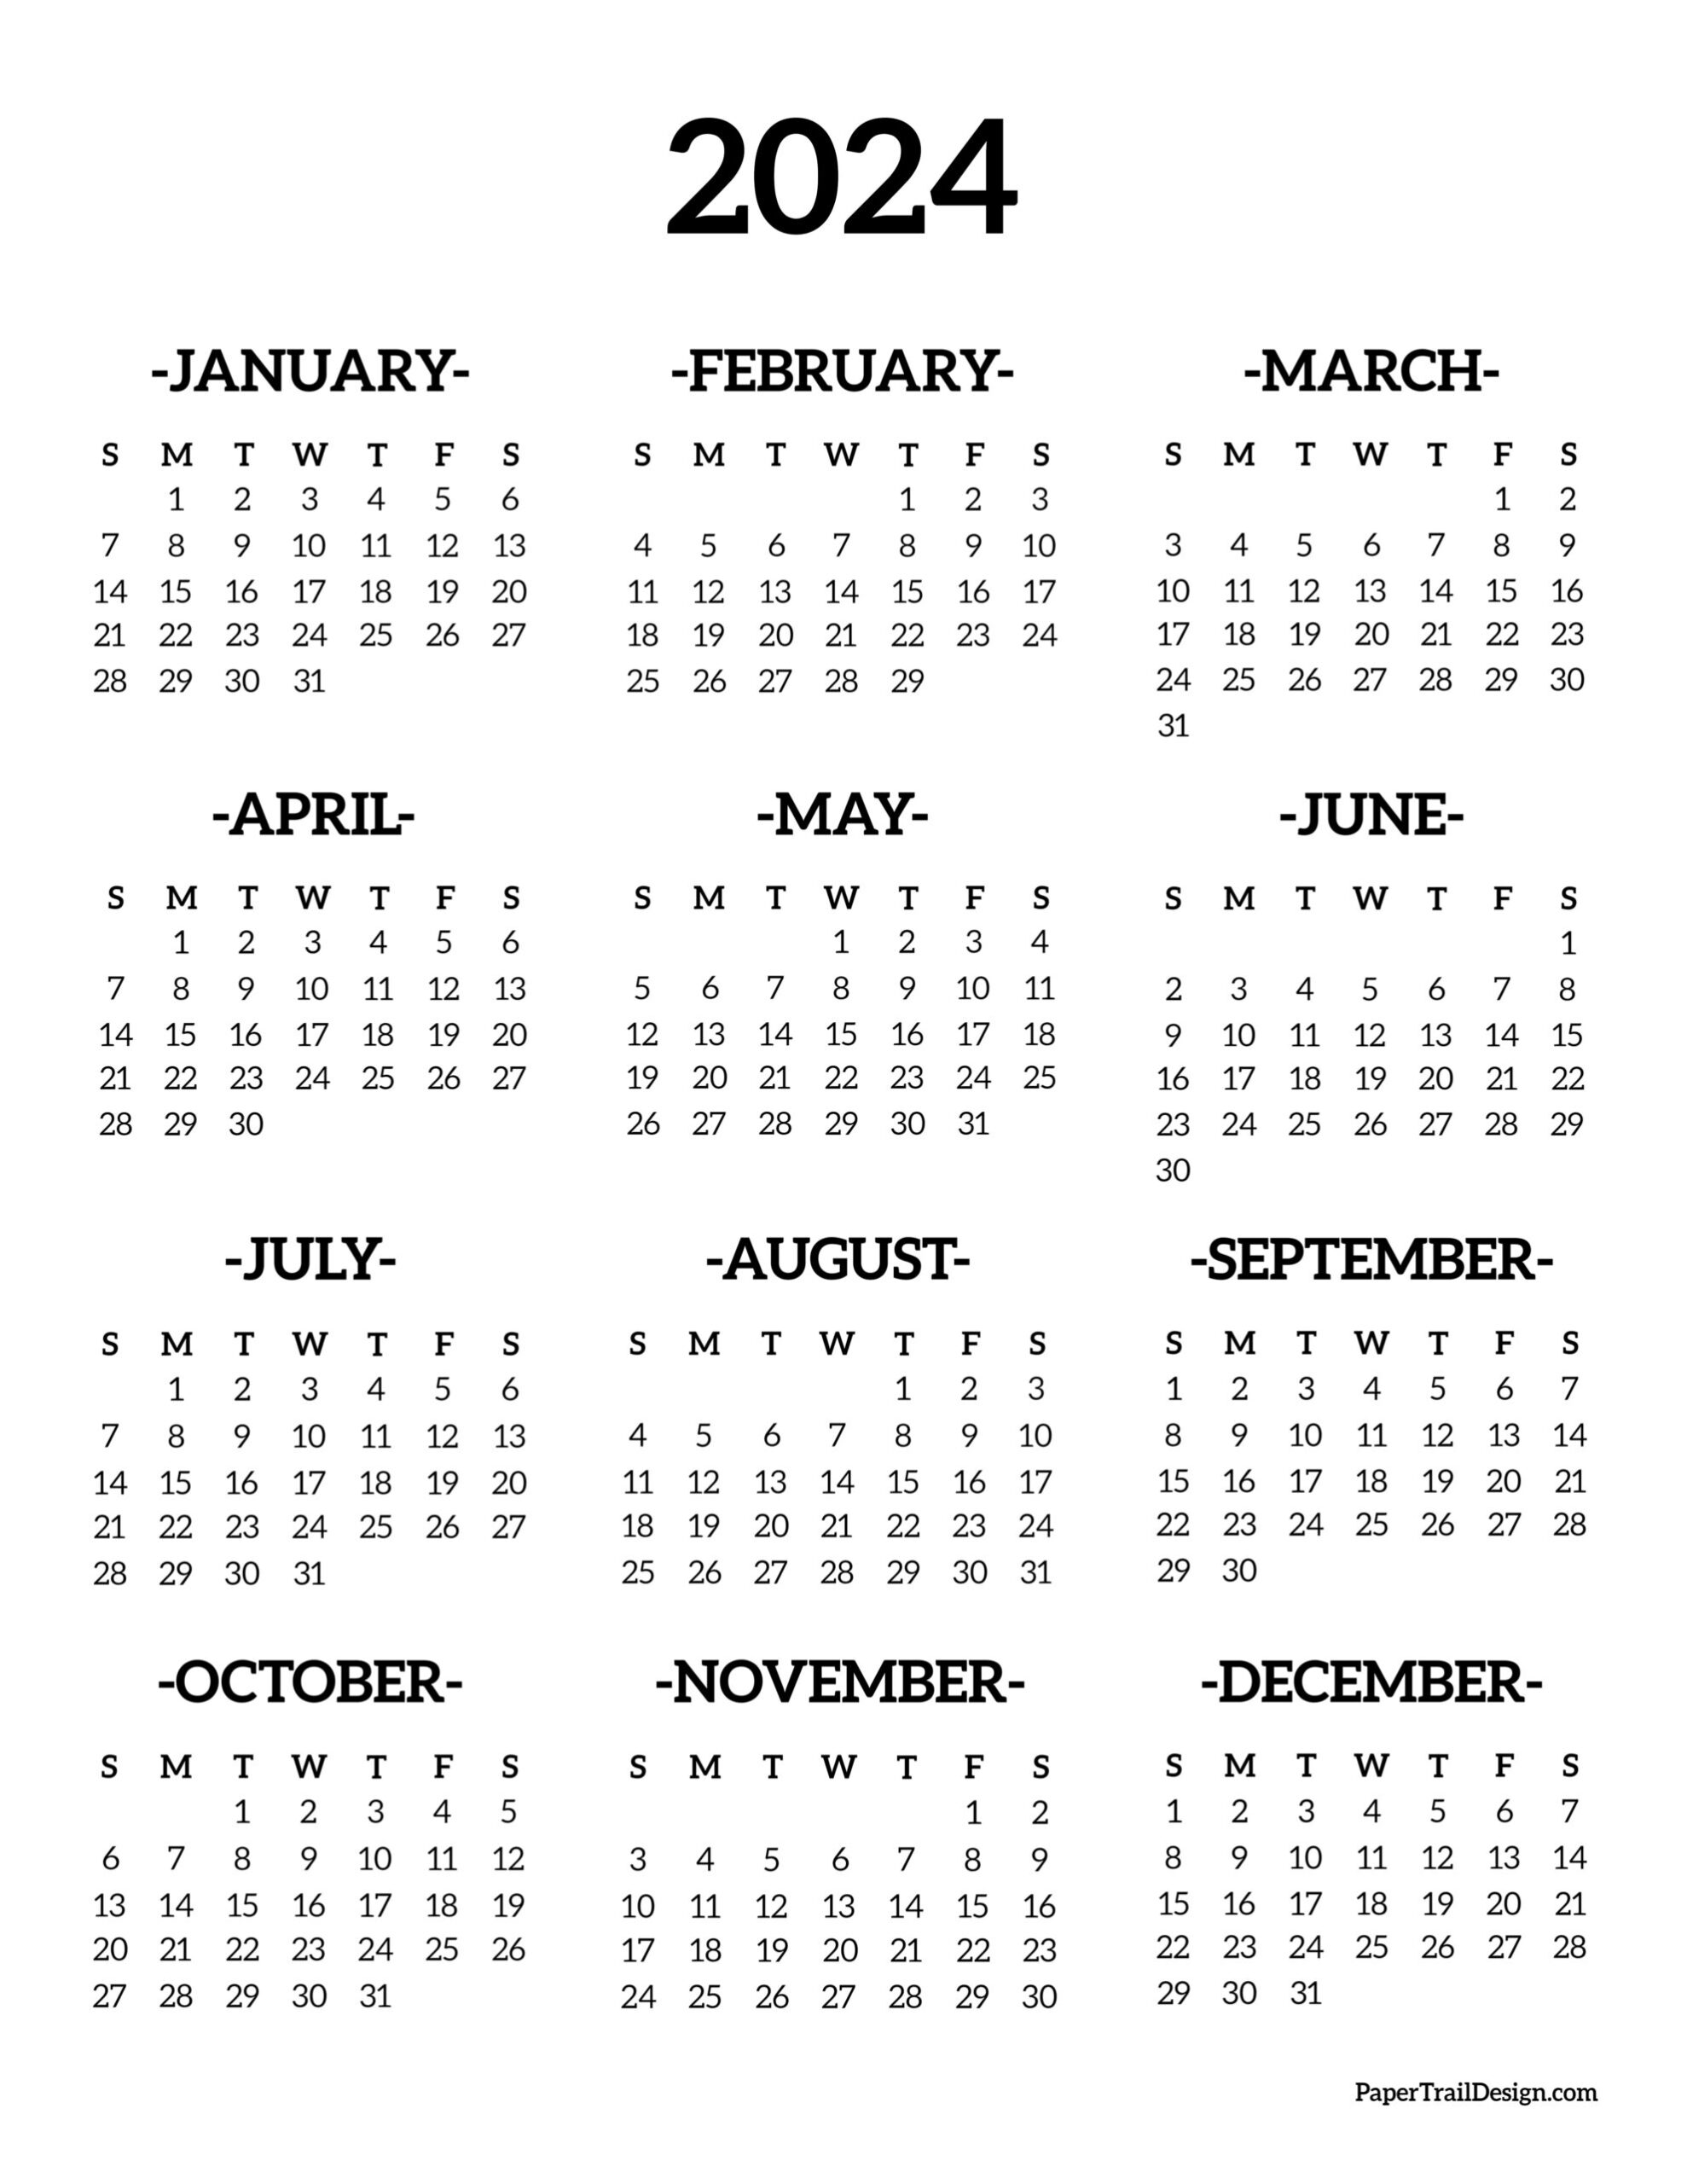 Calendar 2024 Printable One Page - Paper Trail Design for 12 Month Printable Calendar 2024 One Page